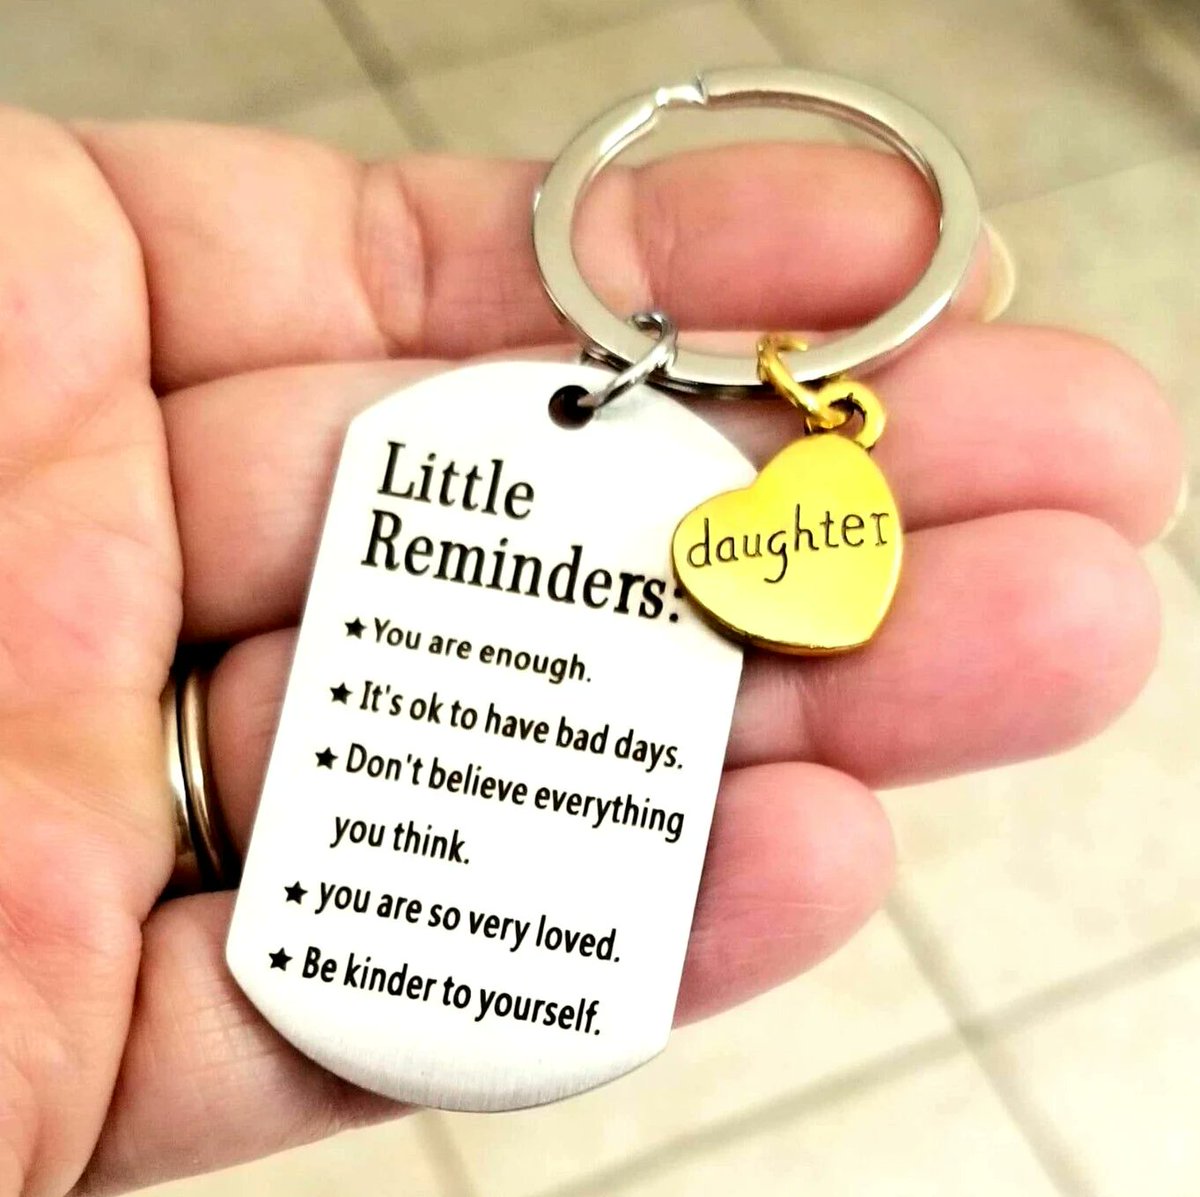 Daughter Keychain, Daughter Inspirational Gift, #DaughterGift #daughterkeychain #daughtergift #daughtergifts #giftfordaughter #giftsfordaughter #momdaughter #daddaughter #daughtergraduationgift #graduationgift #inspirational #affirmations  

 etsy.me/3V6M8He via @Etsy